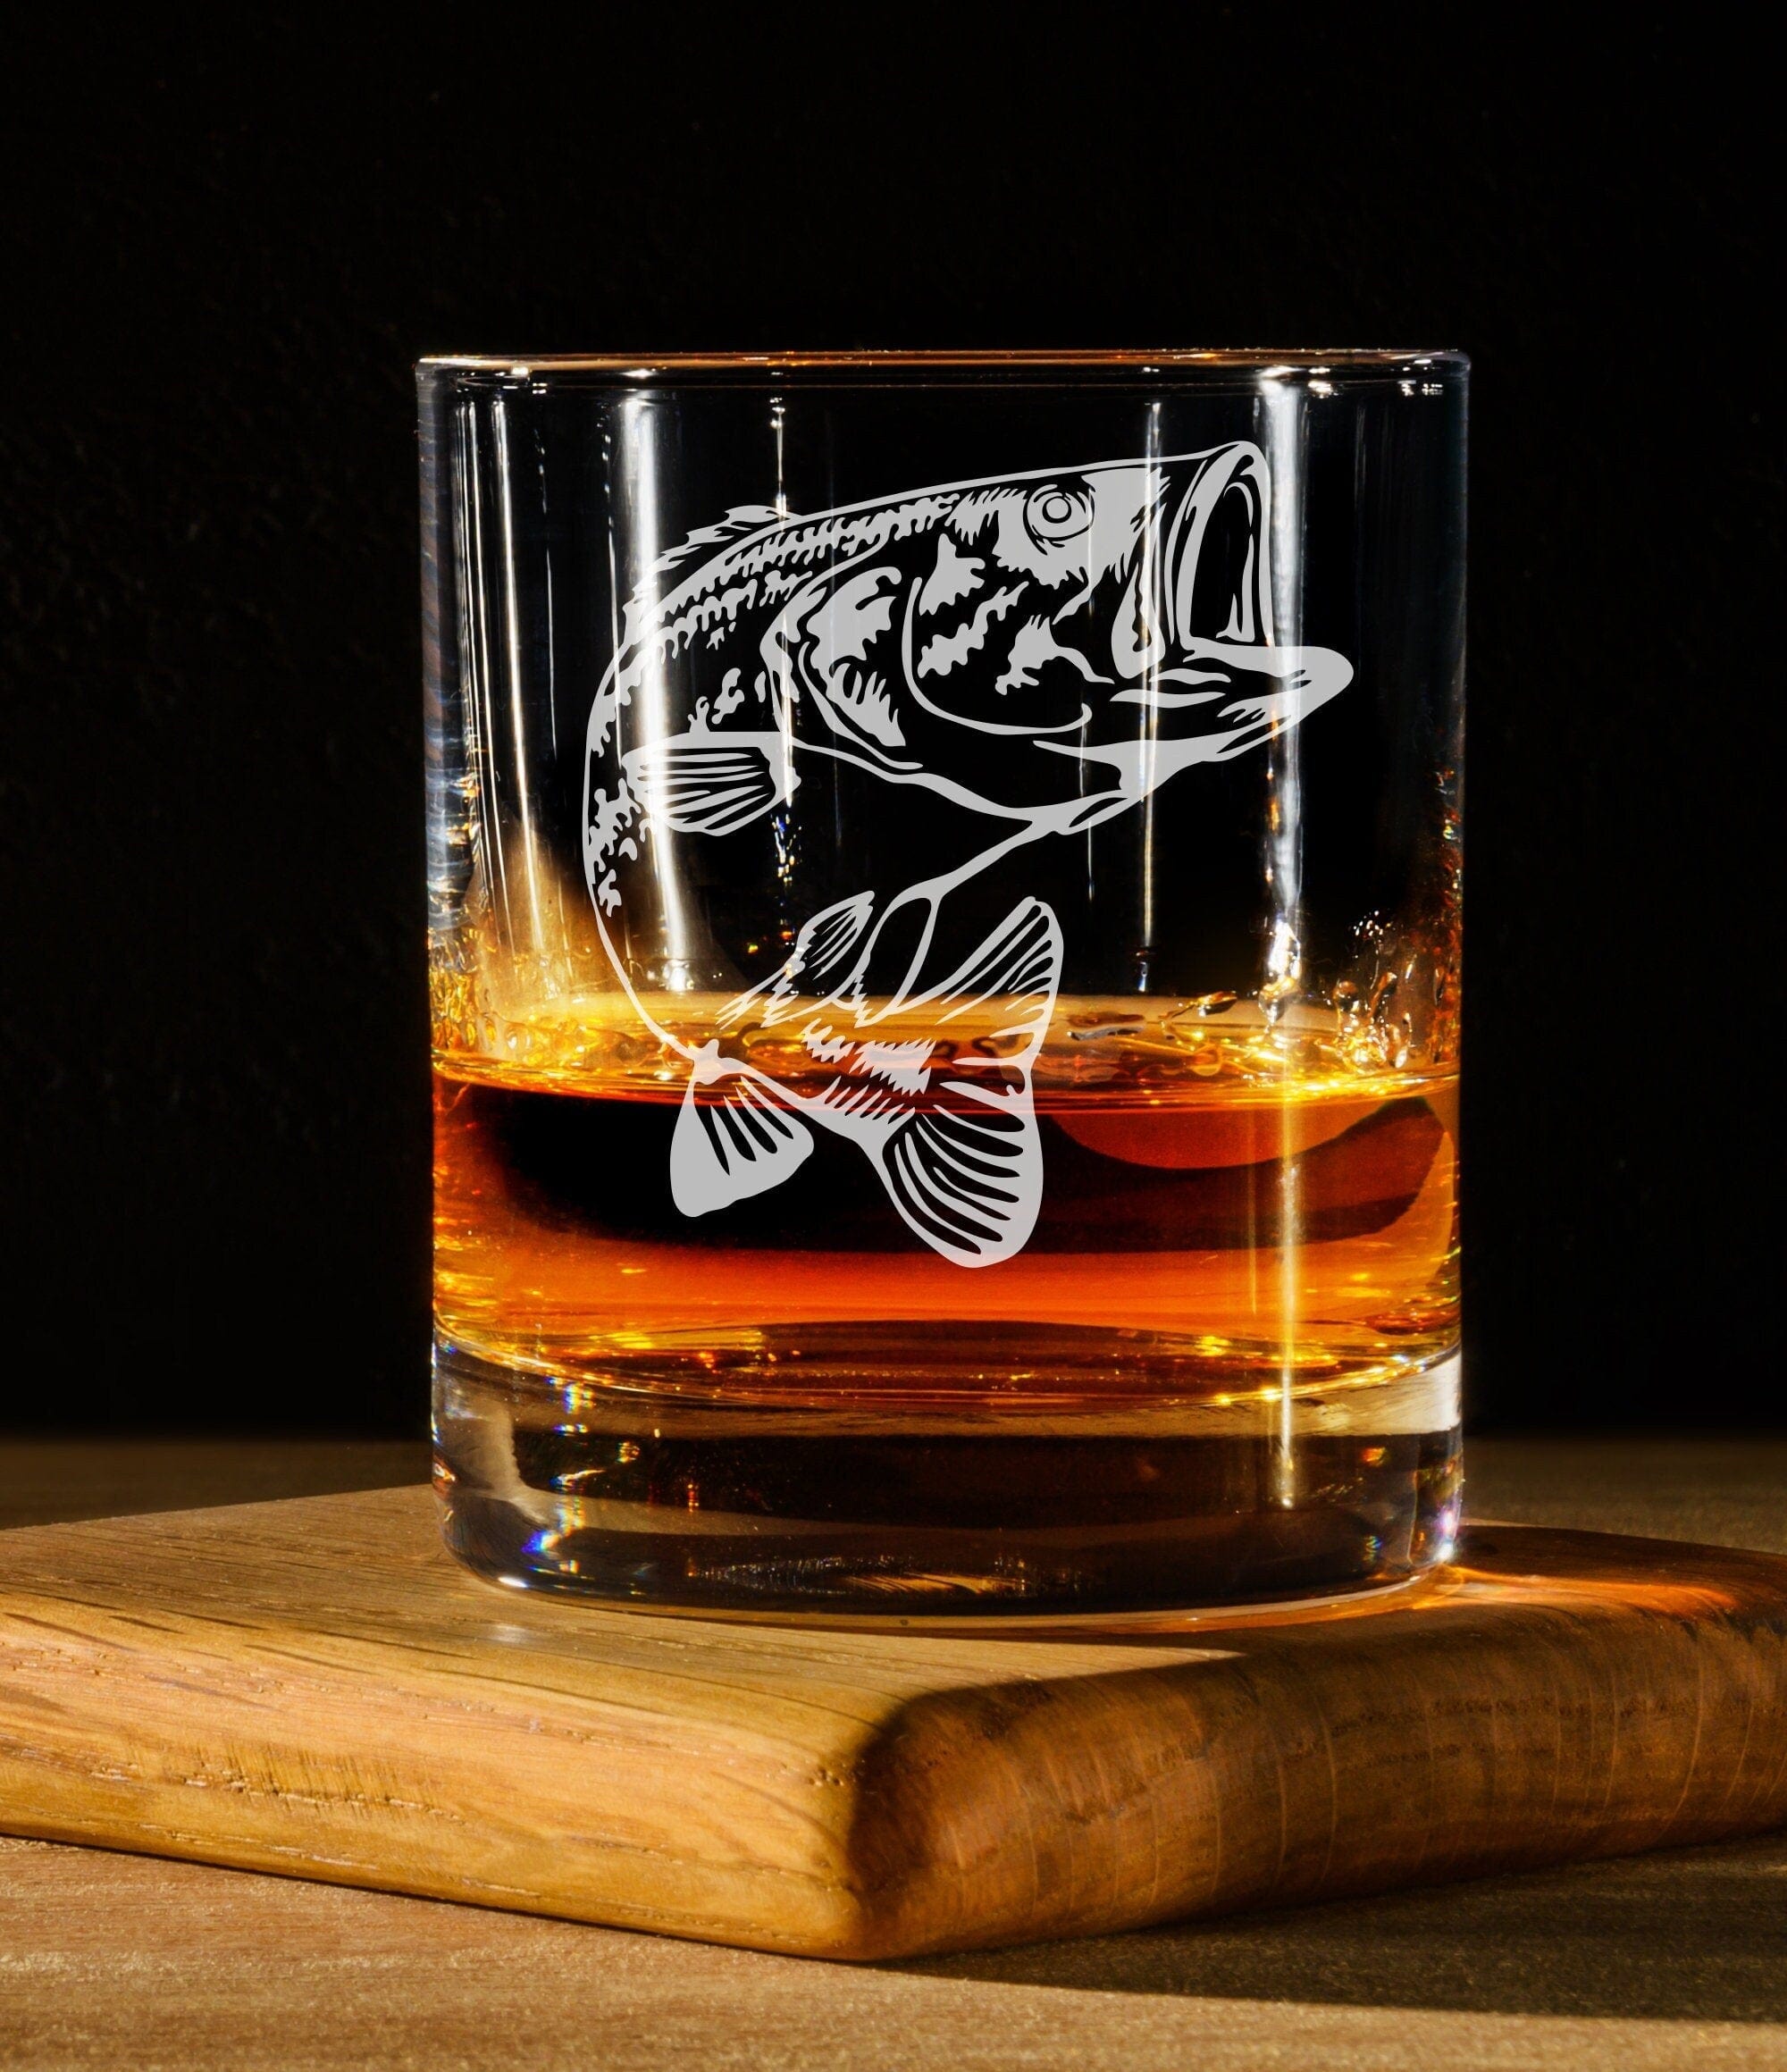 Reel Cool Dad - Funny Whiskey Rocks Glass - Fishing Gifts for